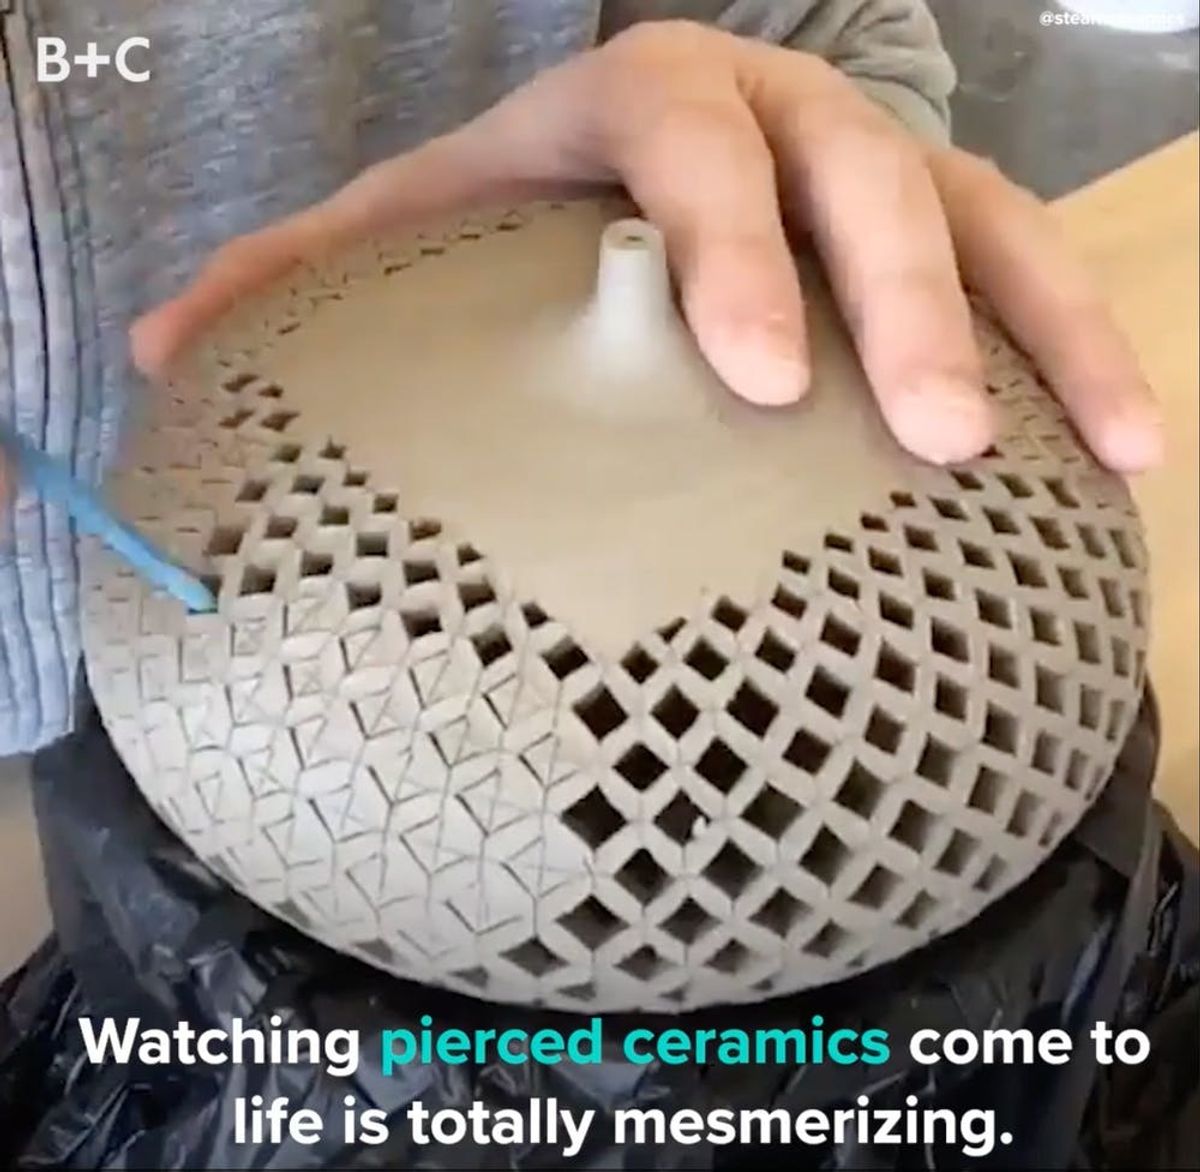 Watching Pierced Ceramics Come to Life Is Totally Mesmerizing